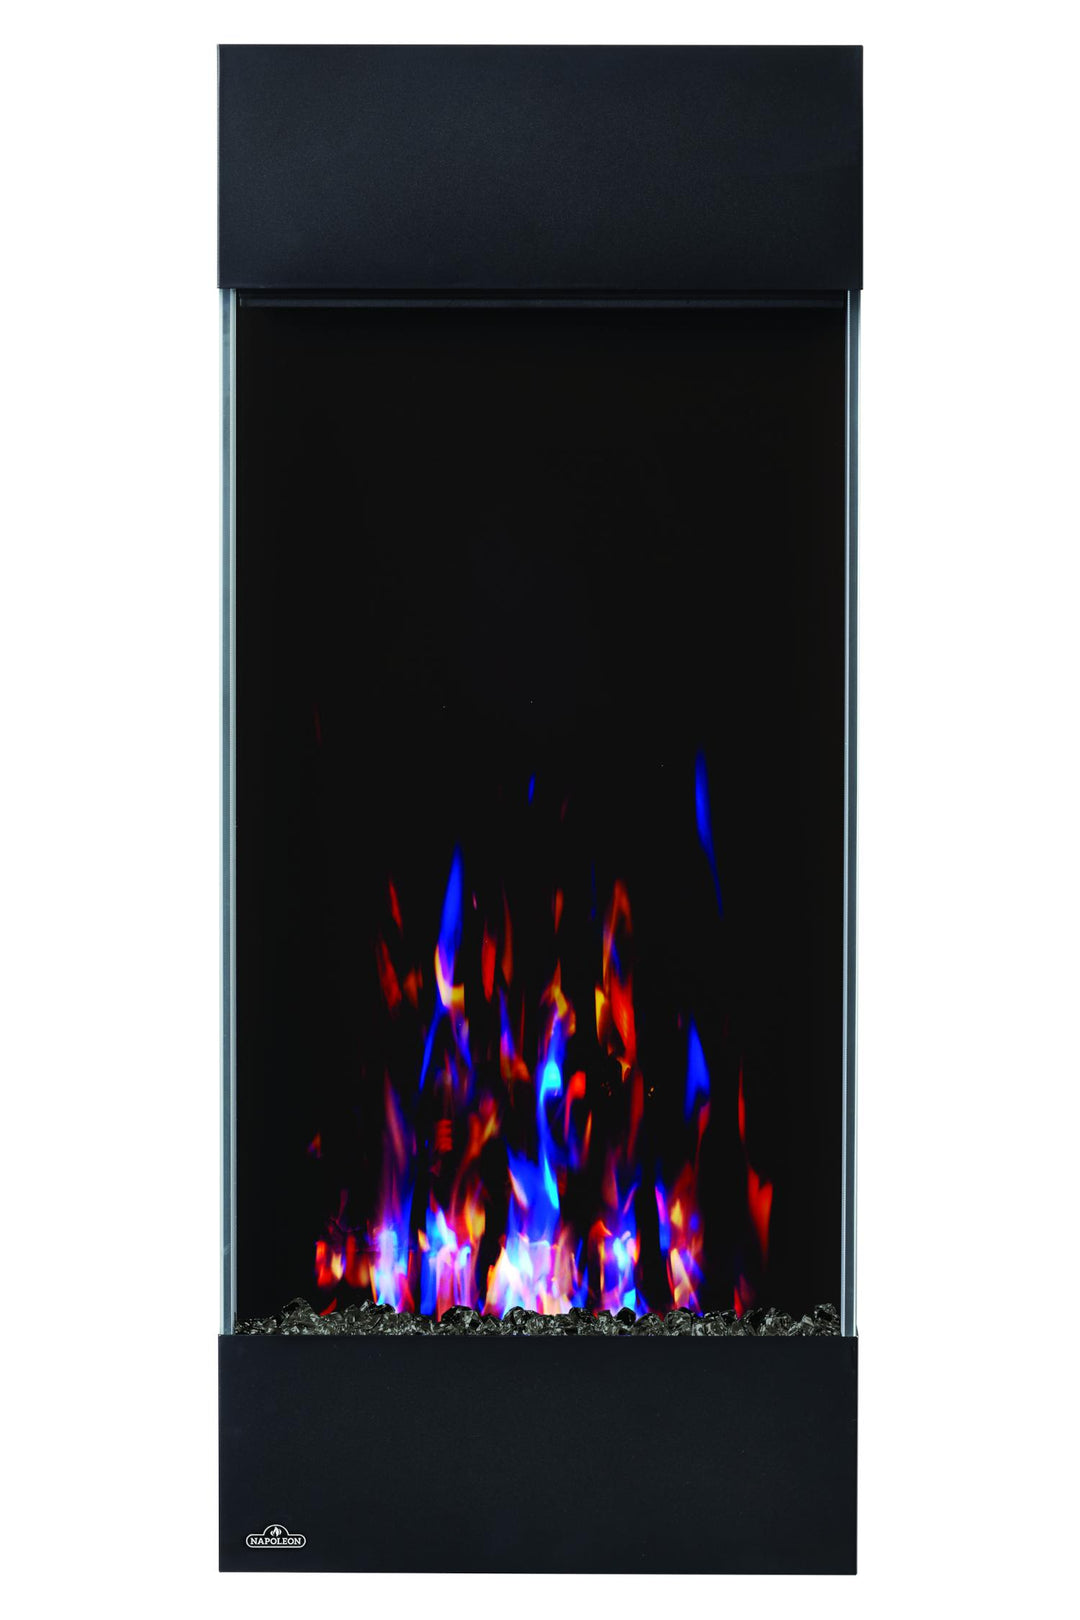 Napoleon Allure Vertical 38" Electric fireplace with mixed flame colors